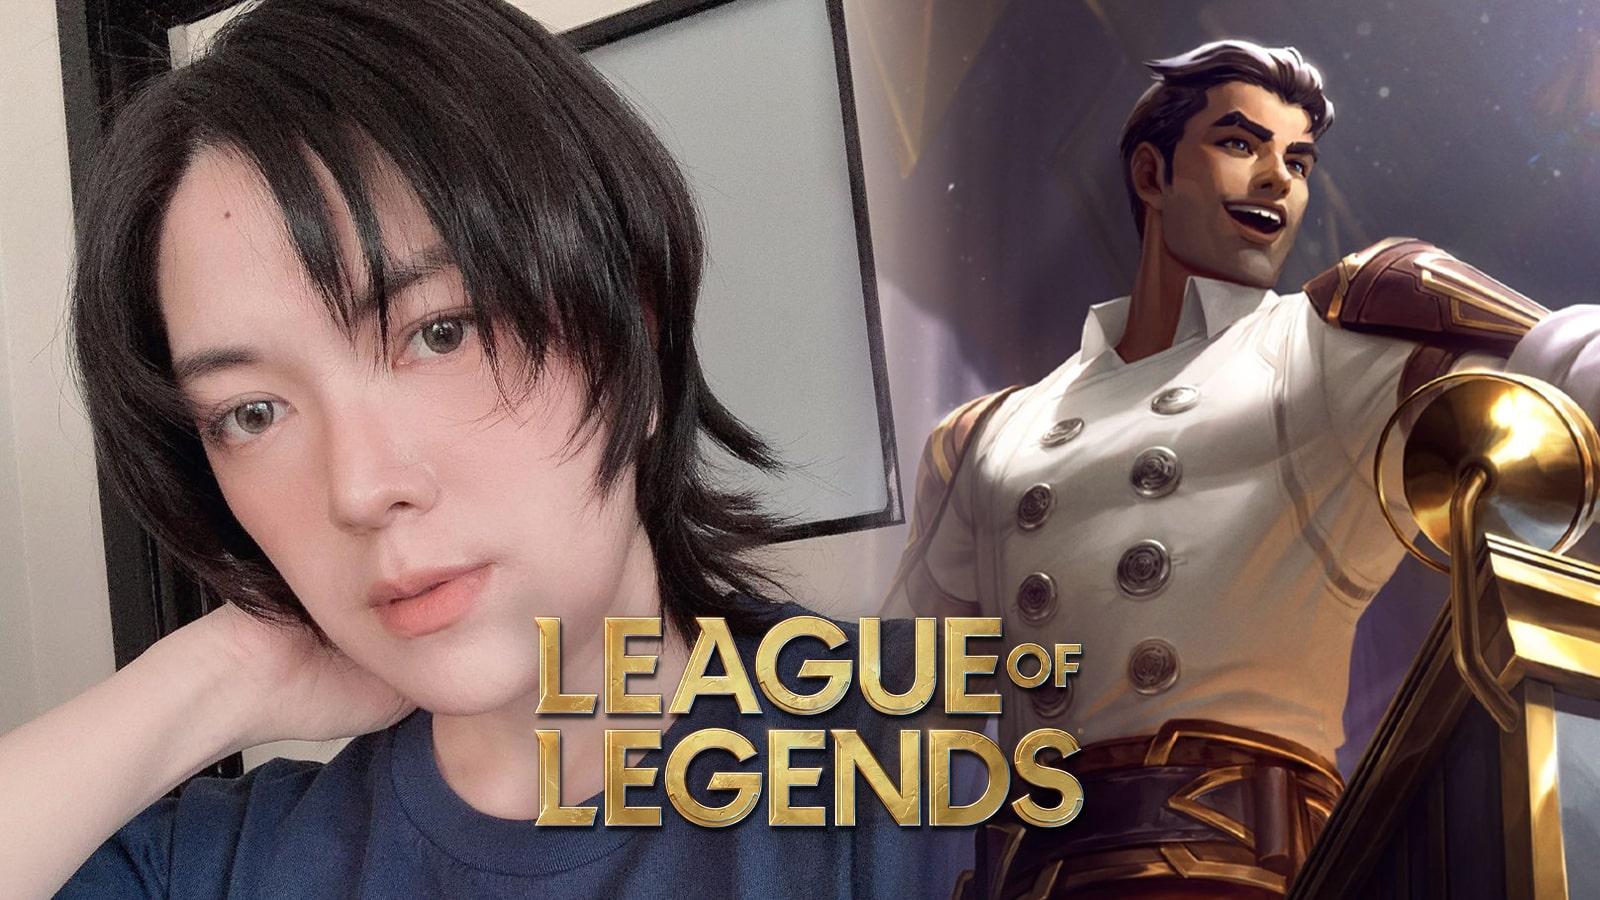 Cosplayer Jin next to Arcane Jayce in League of Legends